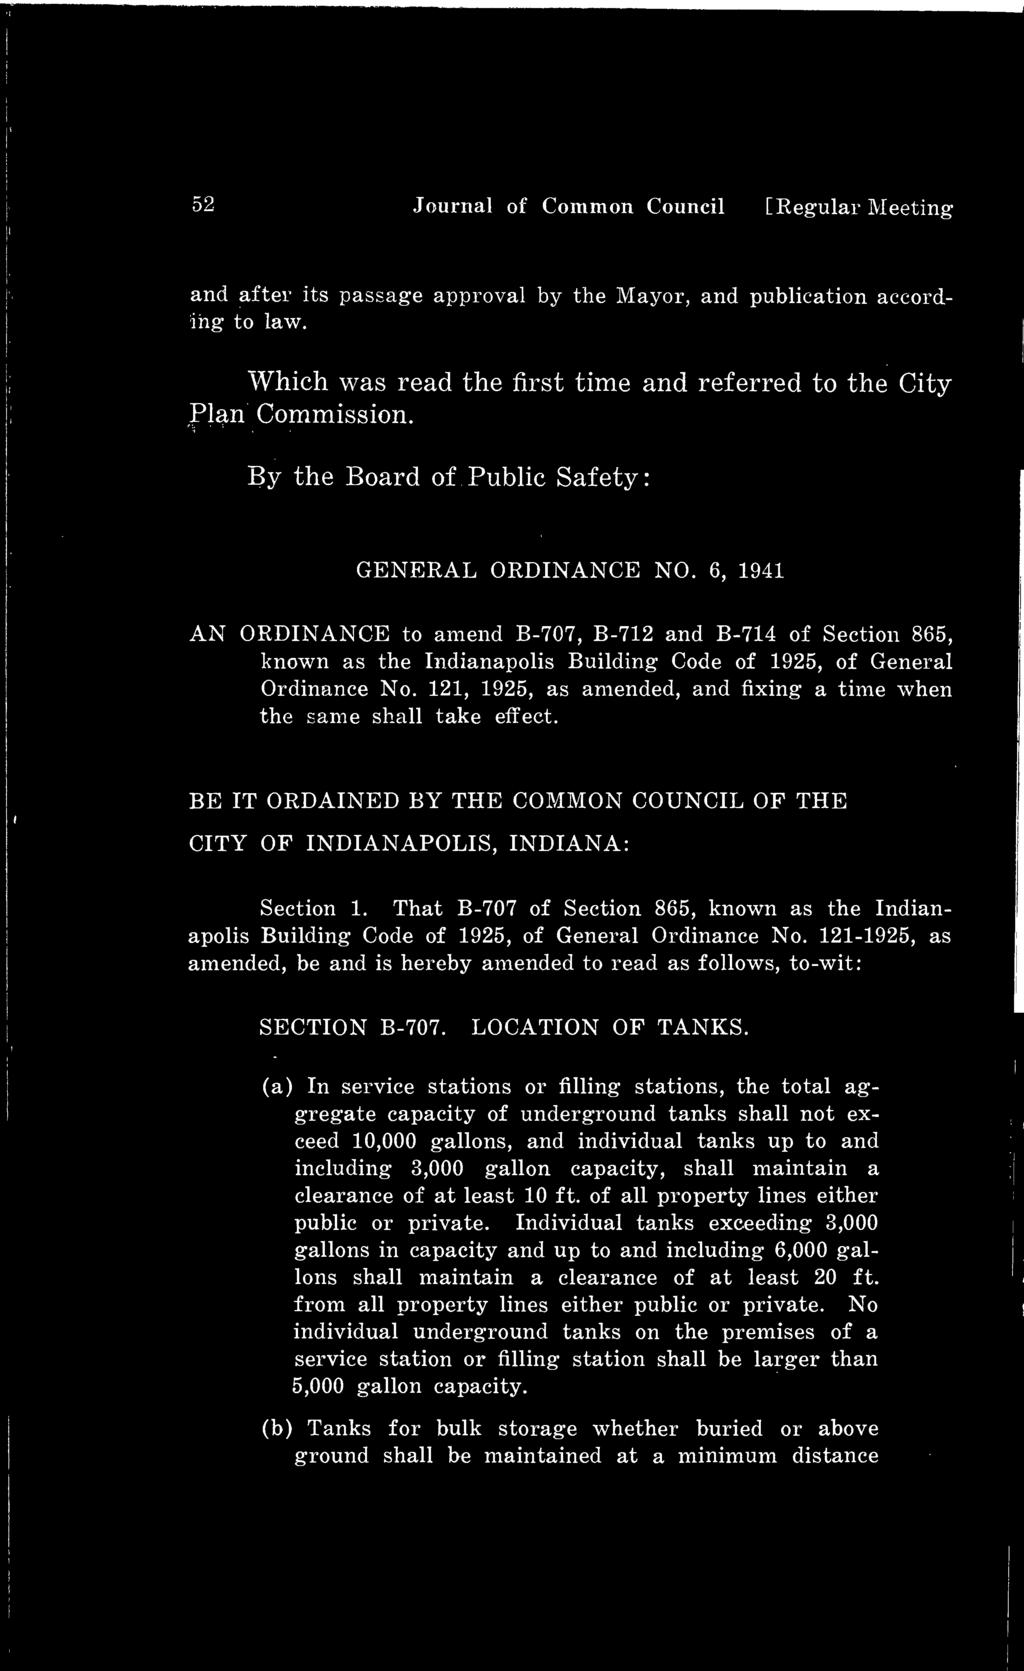 121, 1925, as amended, and fixing a time when the same shall take effect. BE IT ORDAINED BY THE COMMON COUNCIL OF THE CITY OF INDIANAPOLIS, INDIANA: Section 1.